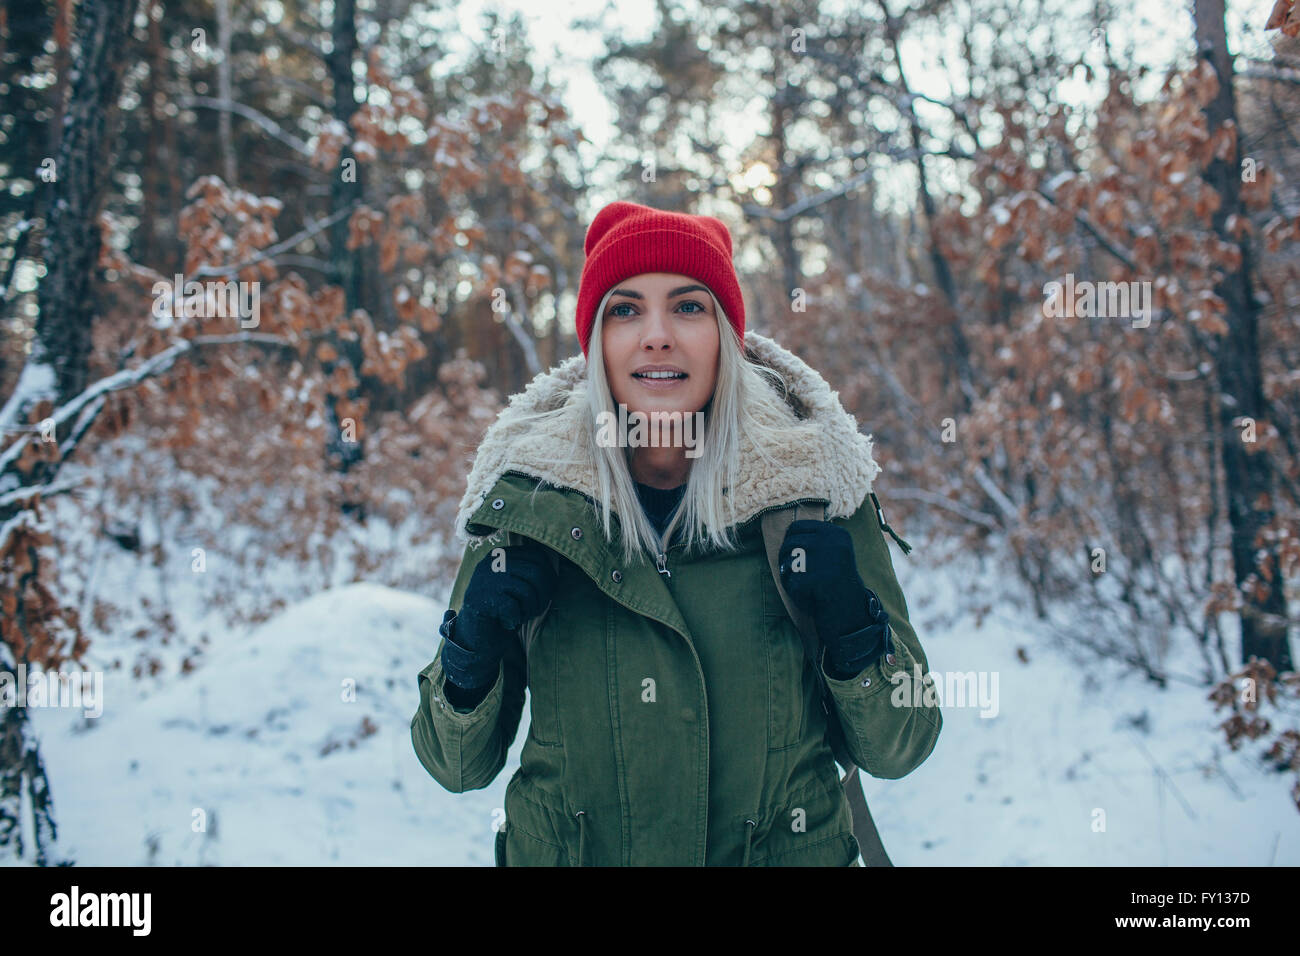 Young woman wearing knit hat and jacket while looking away Stock Photo